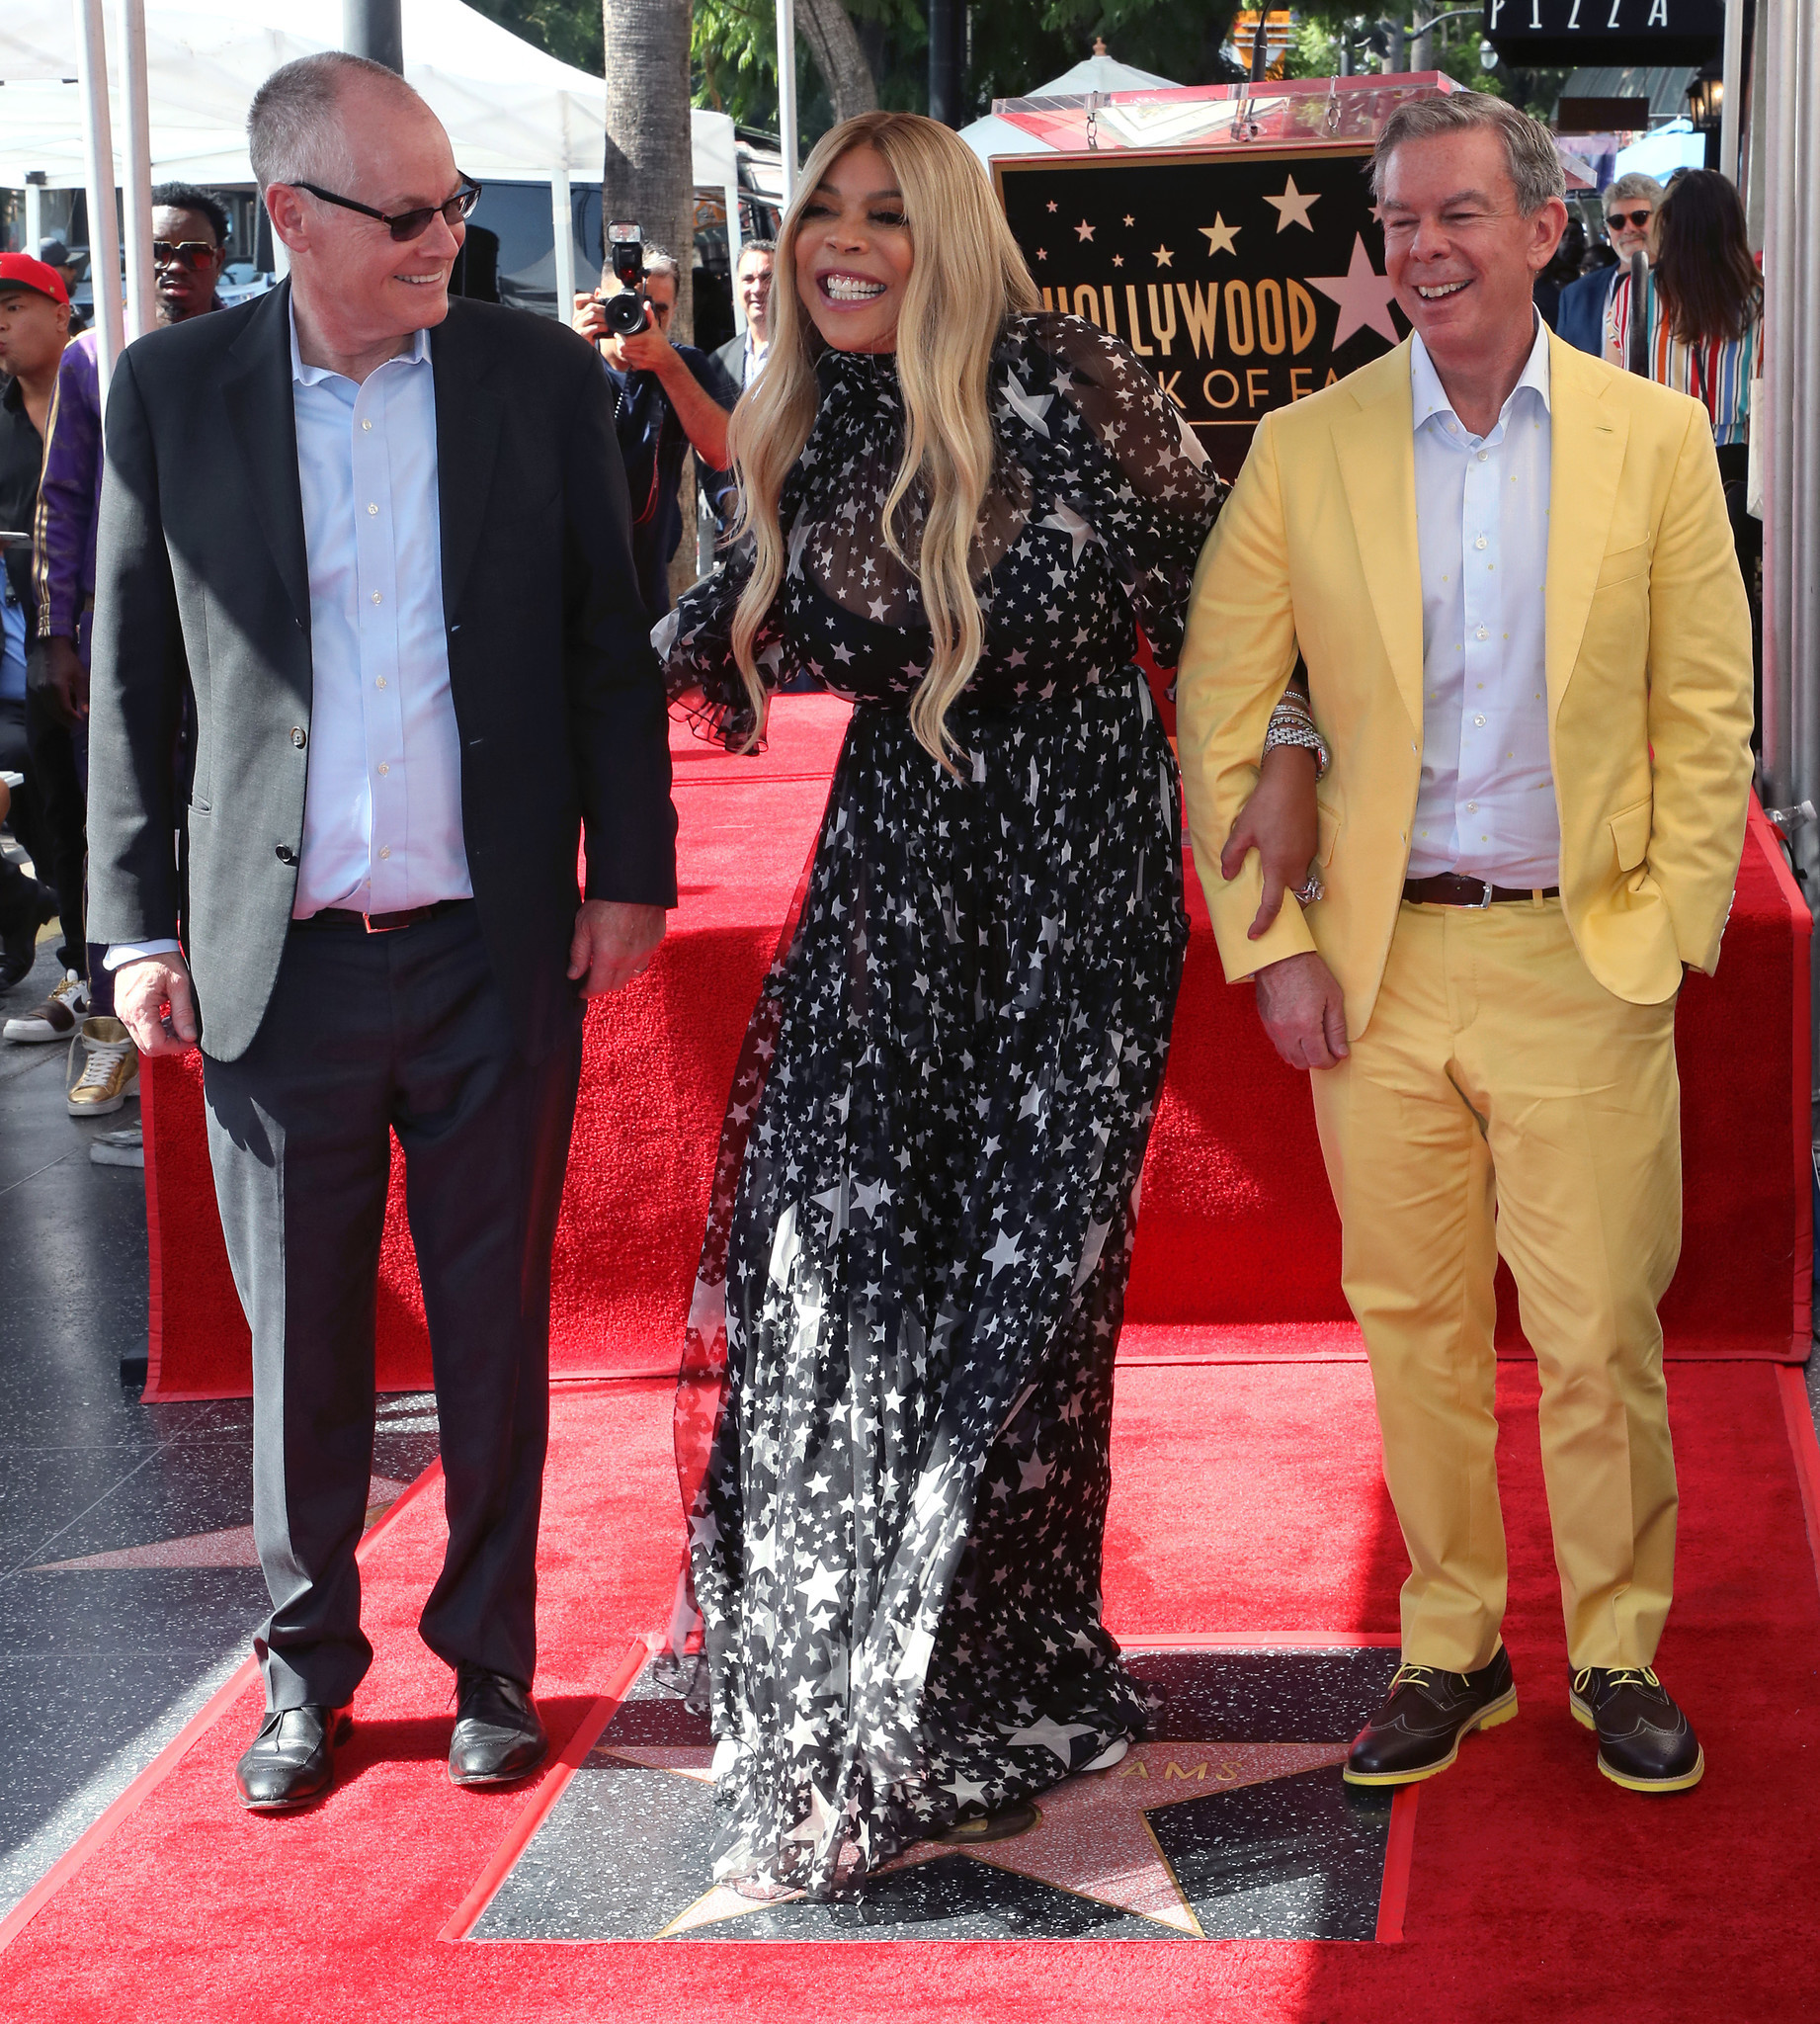 TV and radio personality Wendy Williams was honored with a star on the Hollywood Walk of Fame on Oct. 17, 2019 in Hollywood, Calif. Williams rose to fame on stations including Philadelphia's WUSL and New York's WBLS in the early 2000s and successfully ventured into television in 2008. Here, Williams is joined by CEO Of Fox Television Stations Jack Abernethy (l.) and Z100's Elvis Duran.